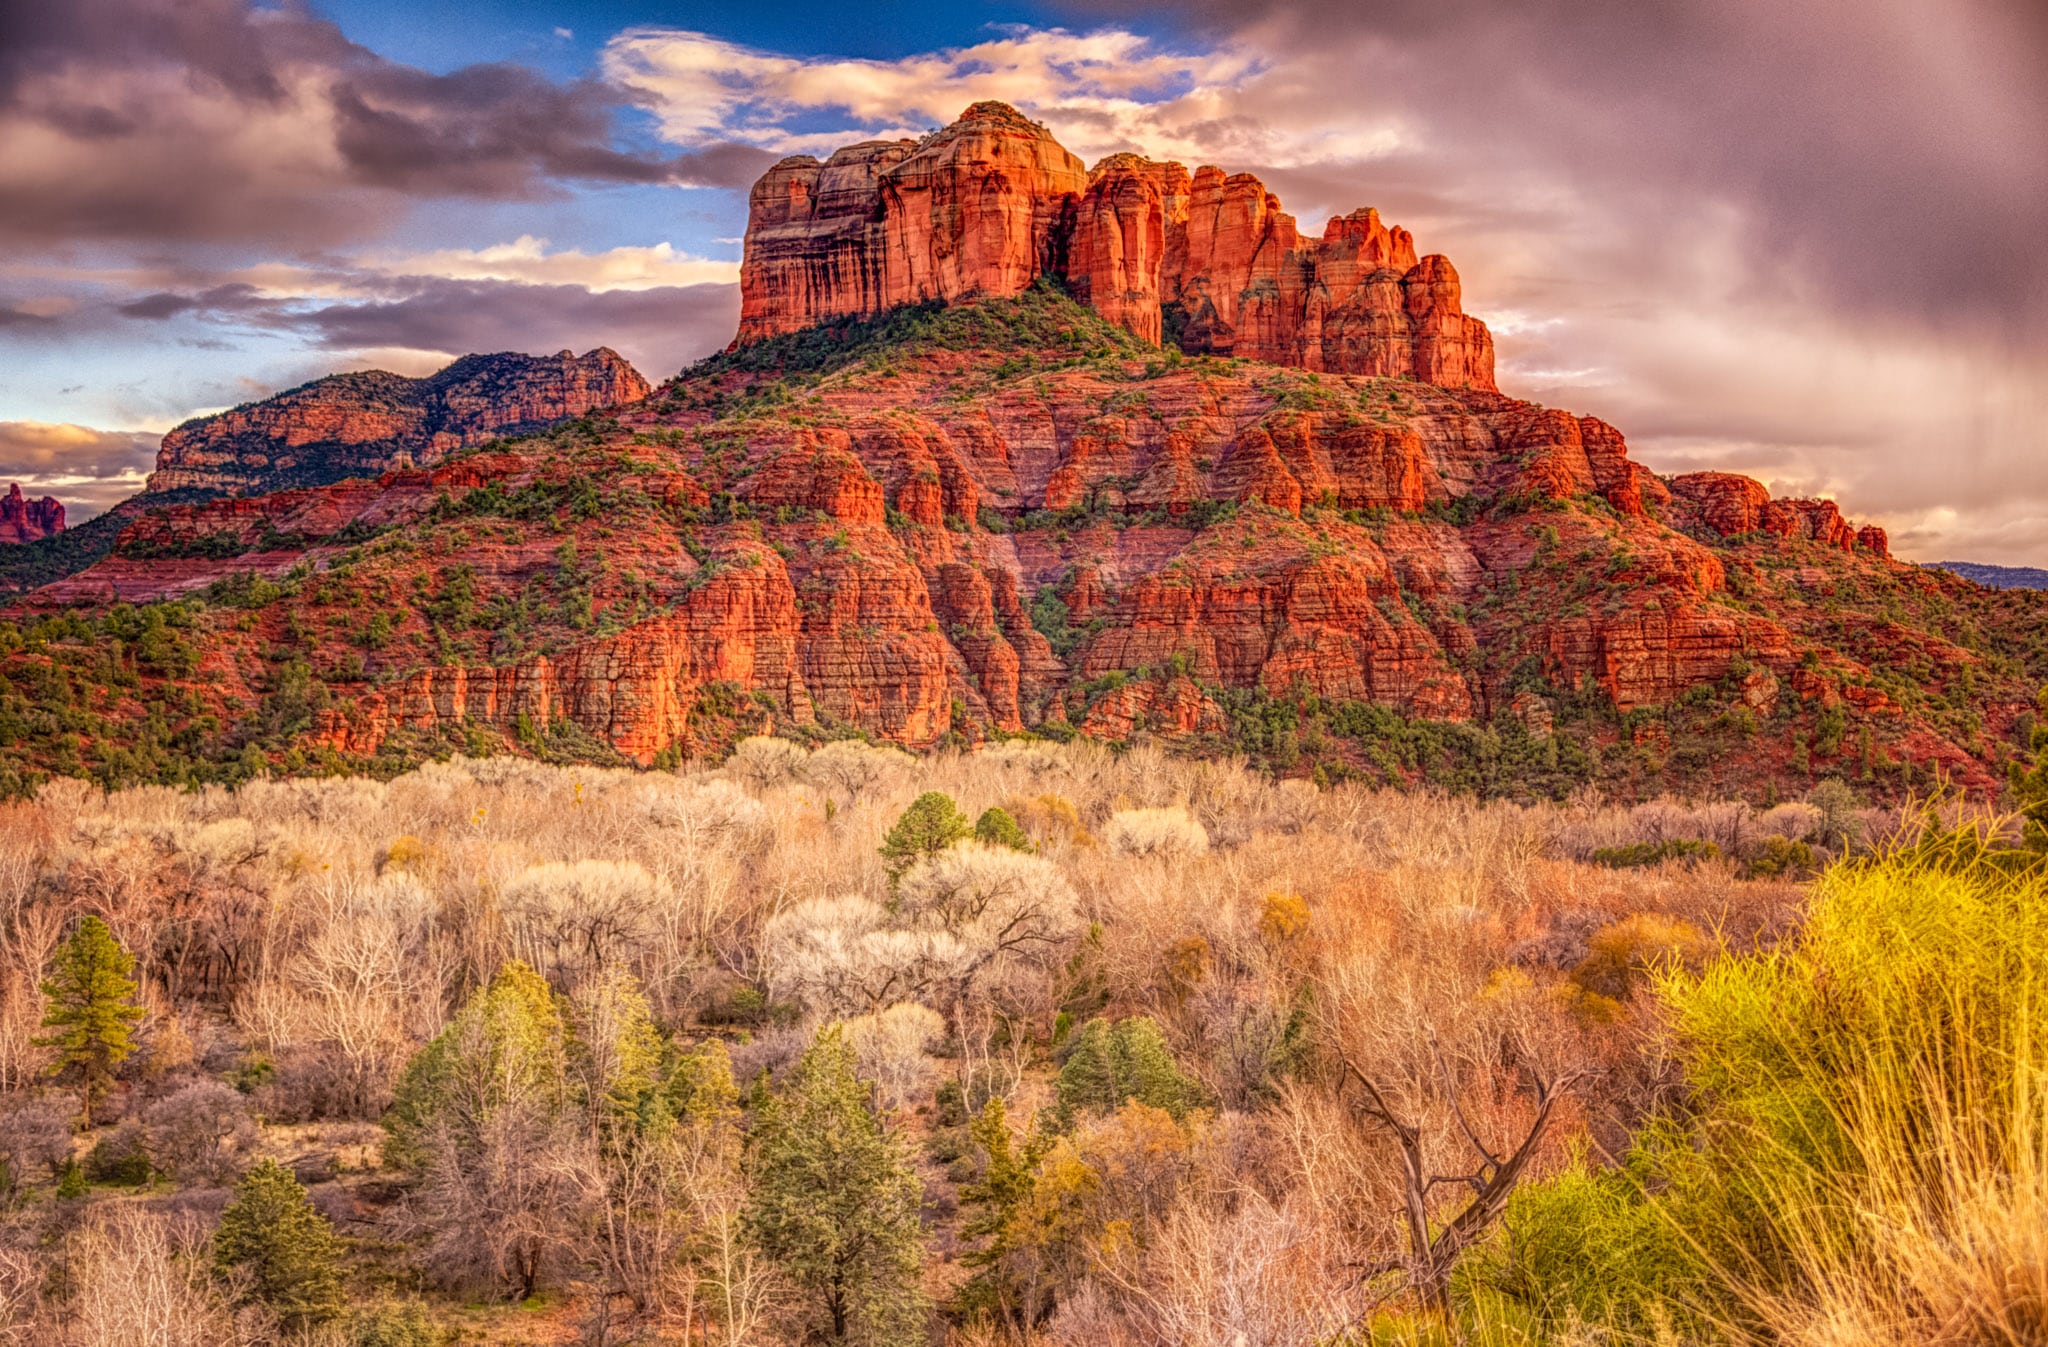 Bell Rock as seen from the Bell Rock Trail in Sedona, Arizona.